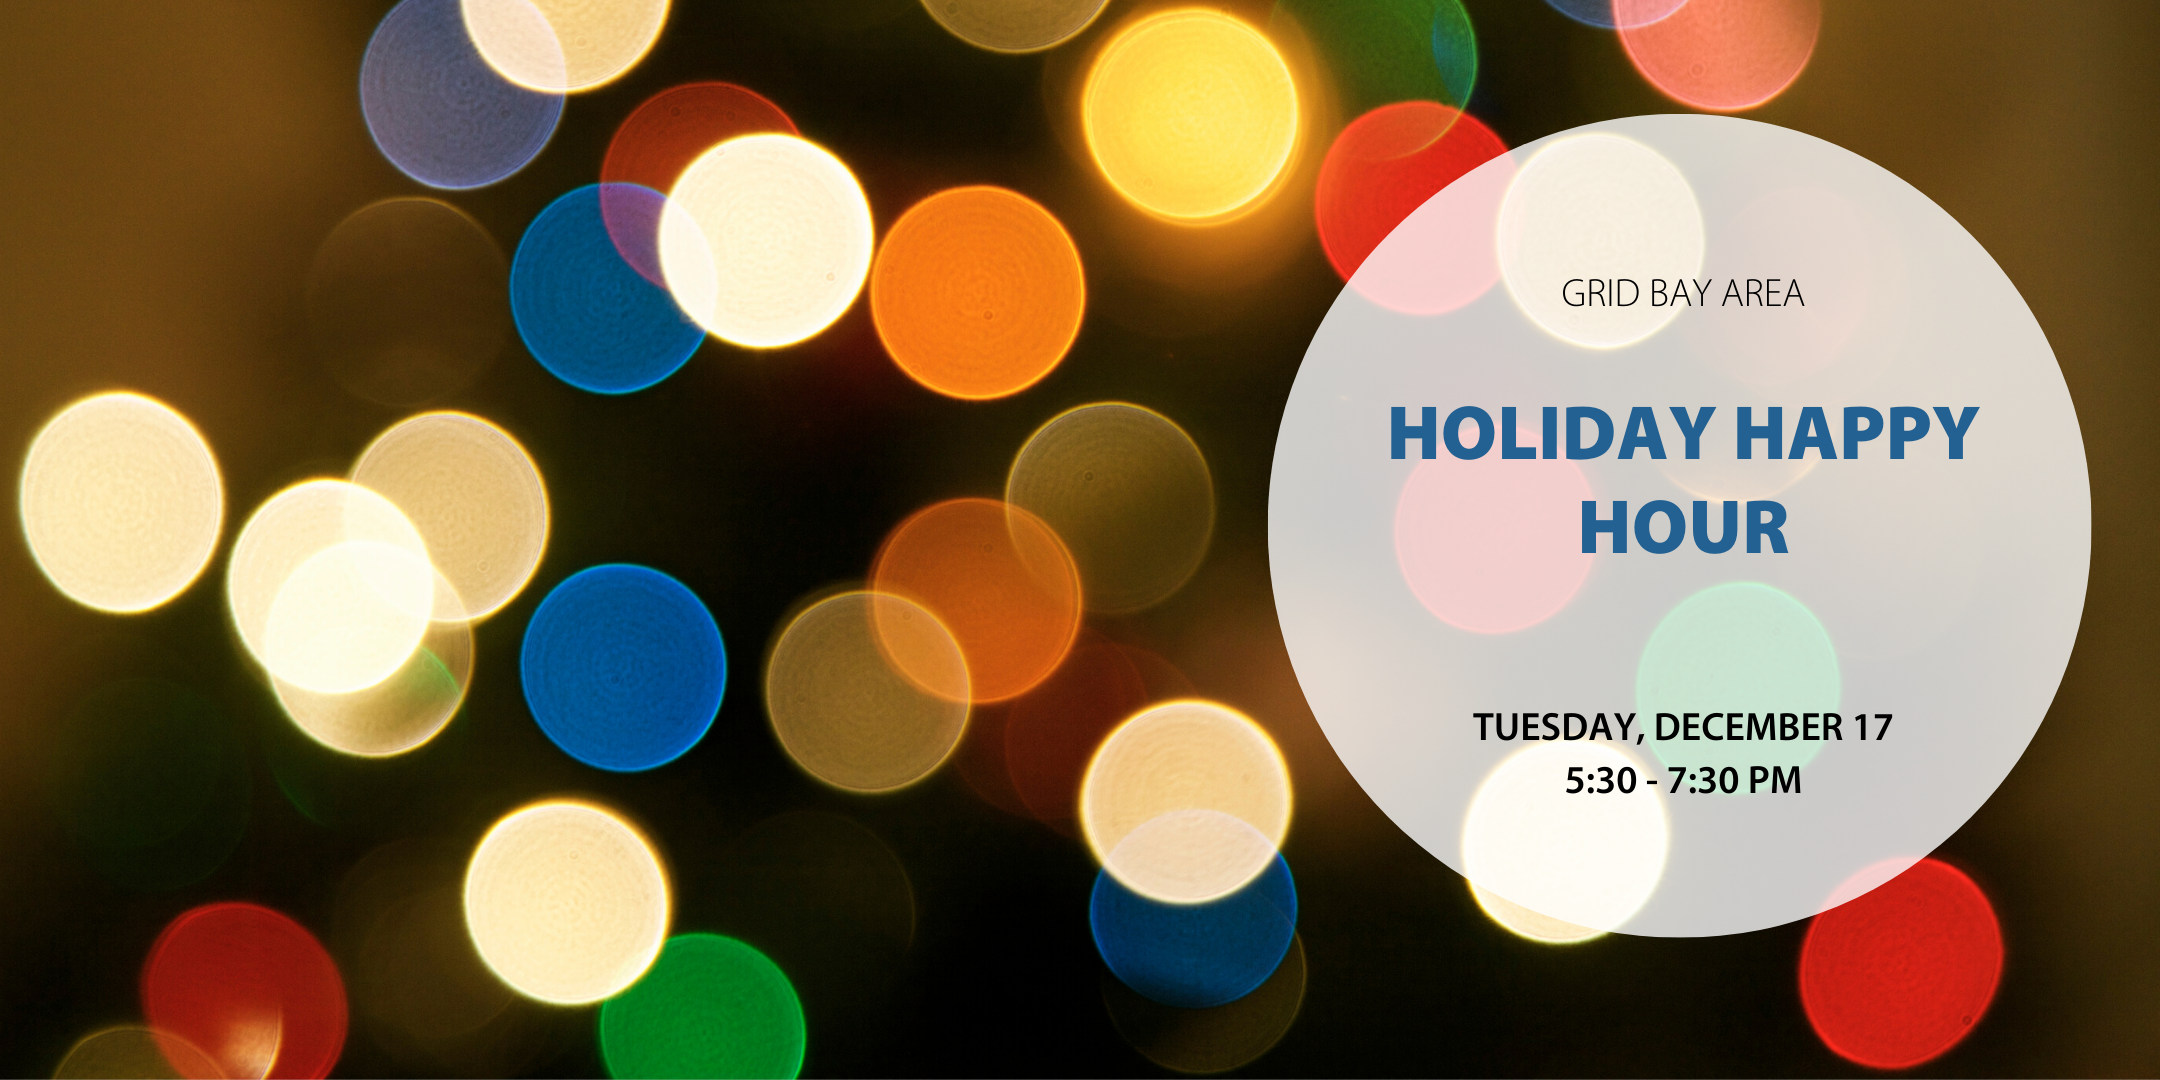 Holiday Happy Hour with GRID Bay Area